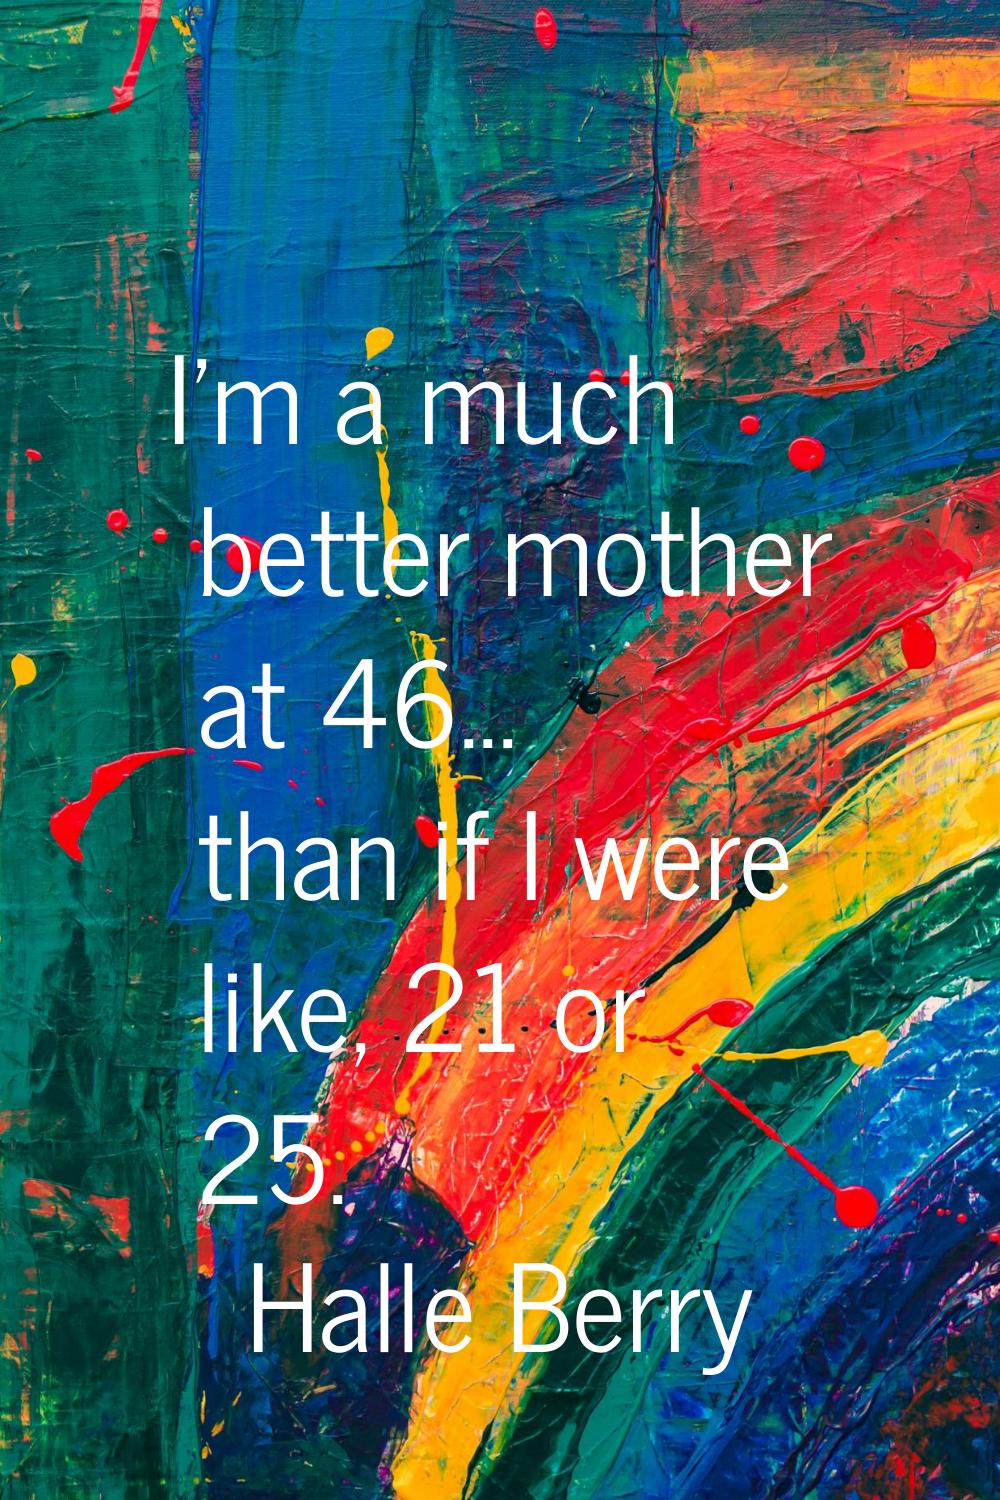 I'm a much better mother at 46... than if I were like, 21 or 25.